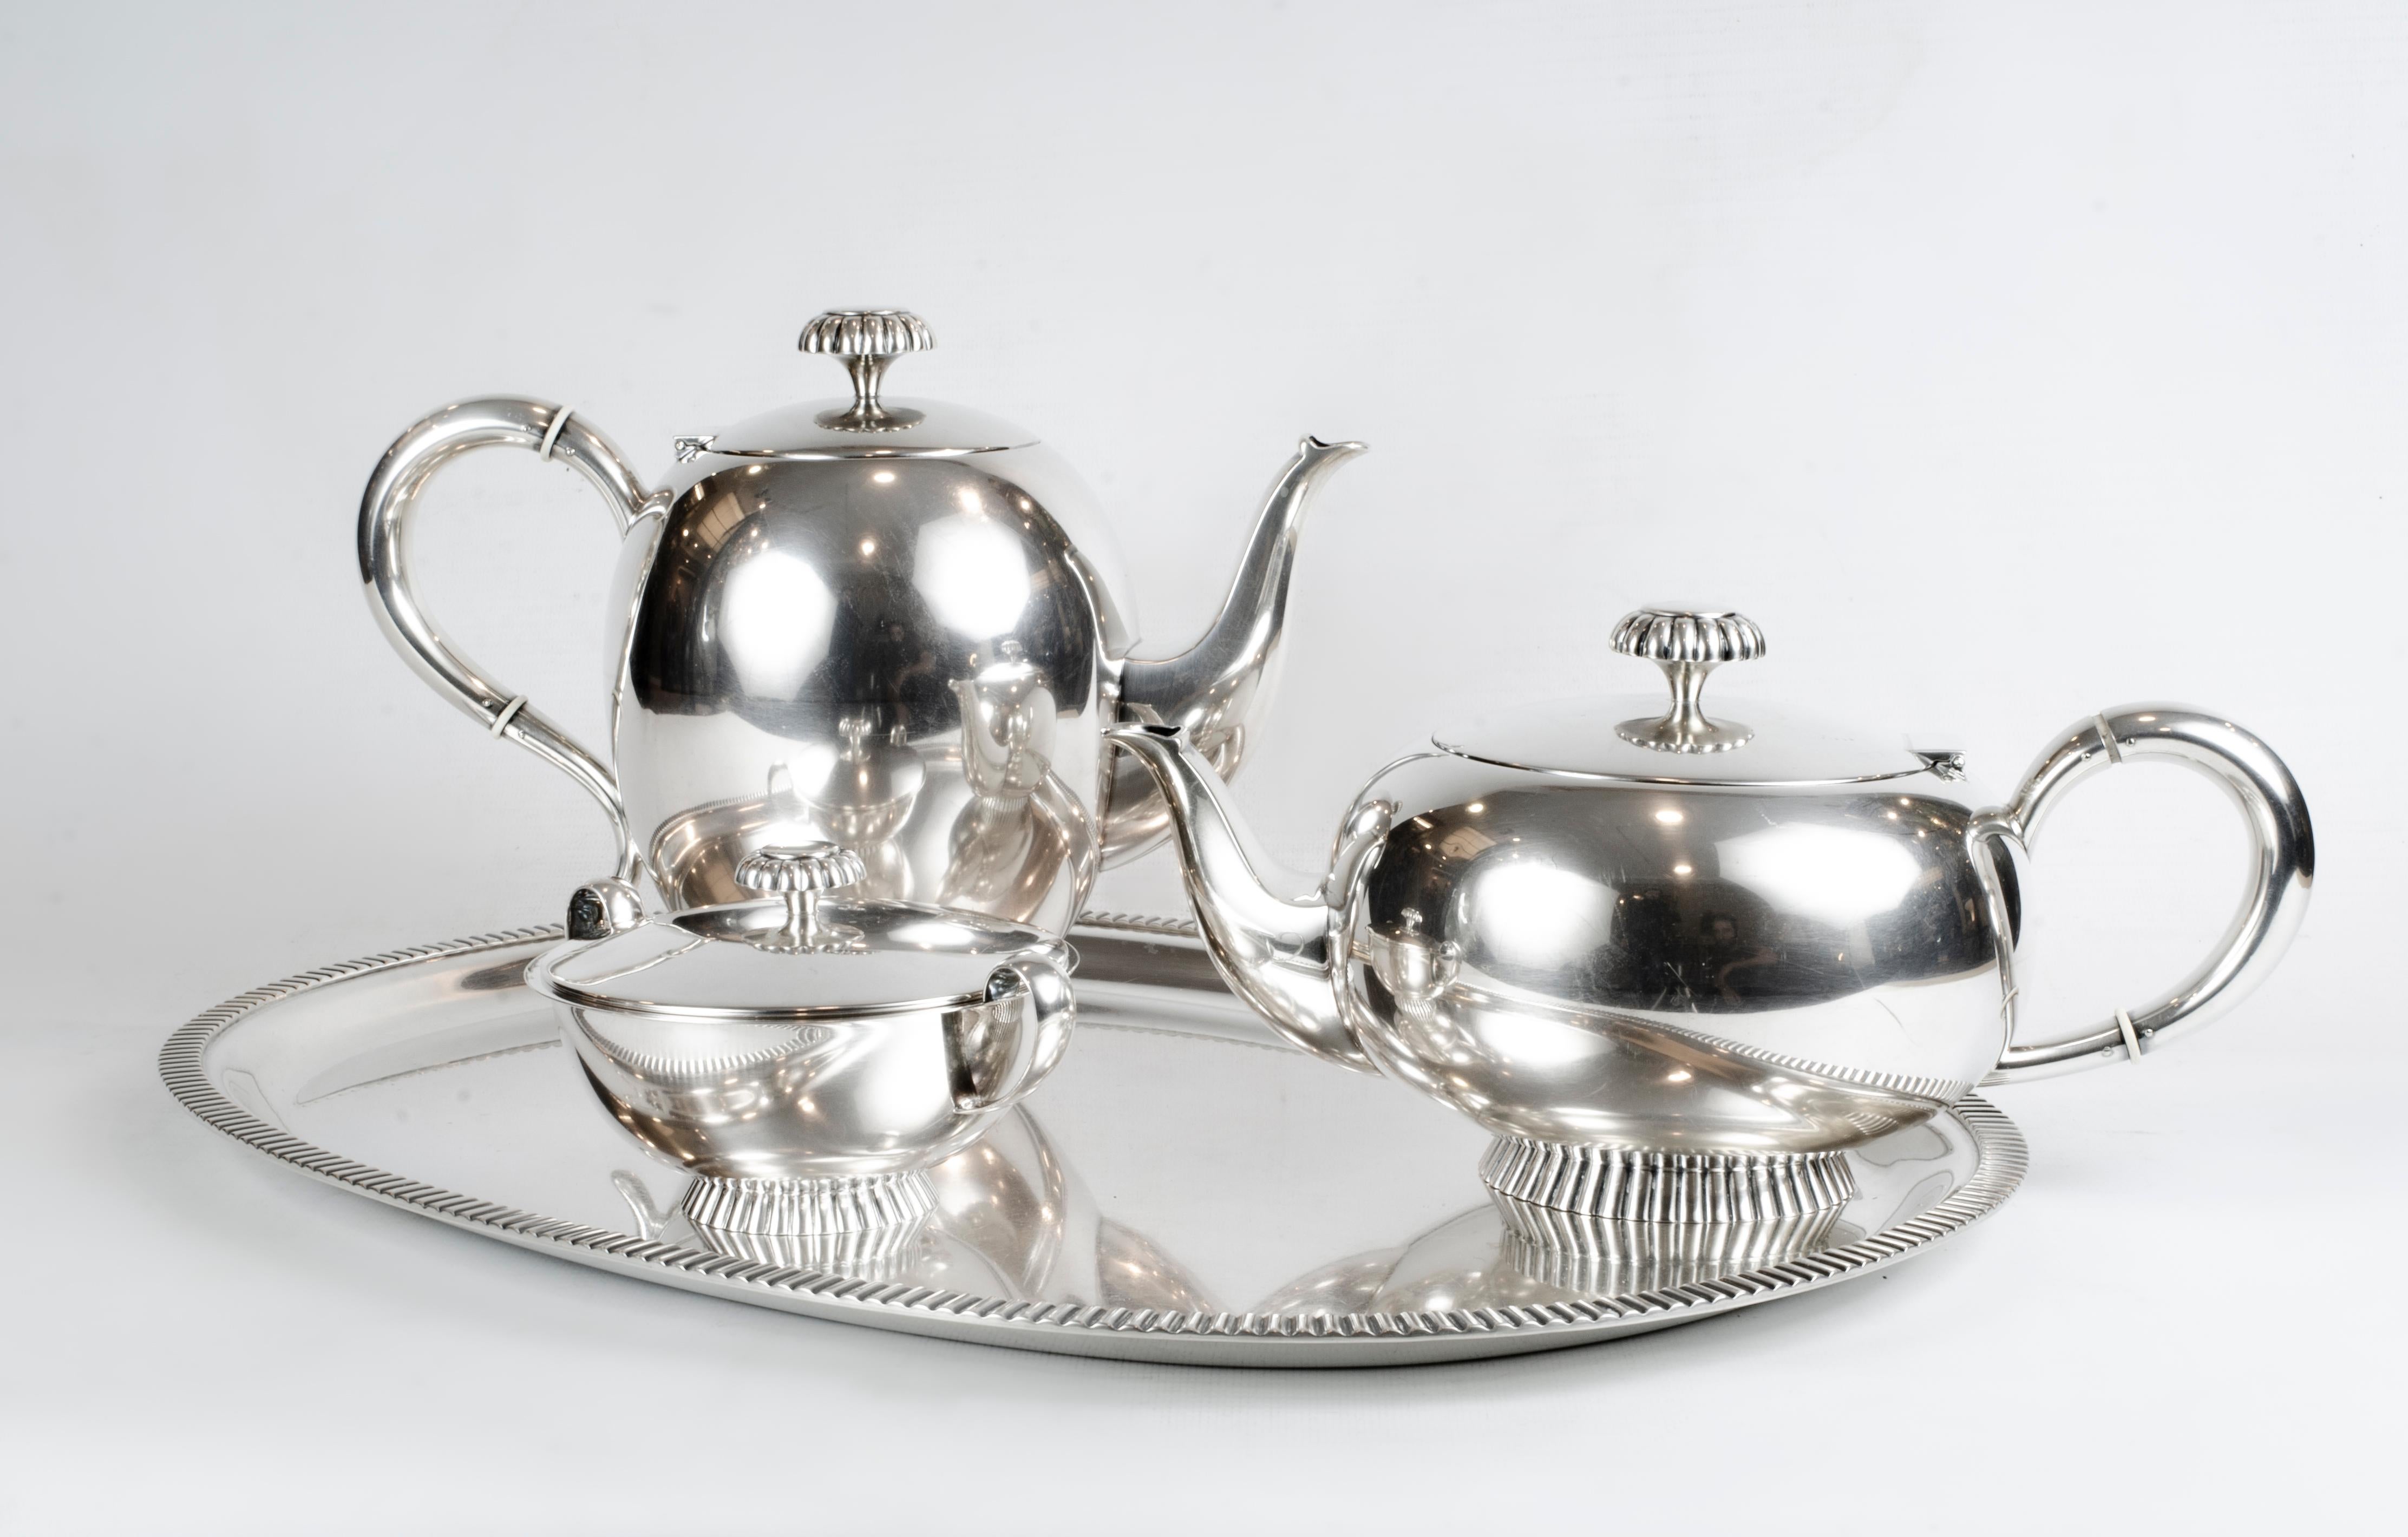 Sterling silver tea and coffee service.
Made by M.H. Wilkens & Sӧhne in Bremen-Hemelingen, Germany. 

The service comprises: 1 coffeepot with hinged cover, 1 teapot with hinged cover, 1 sugar with cover, all on tray.

Hollowware: Coffeepot: ovoid